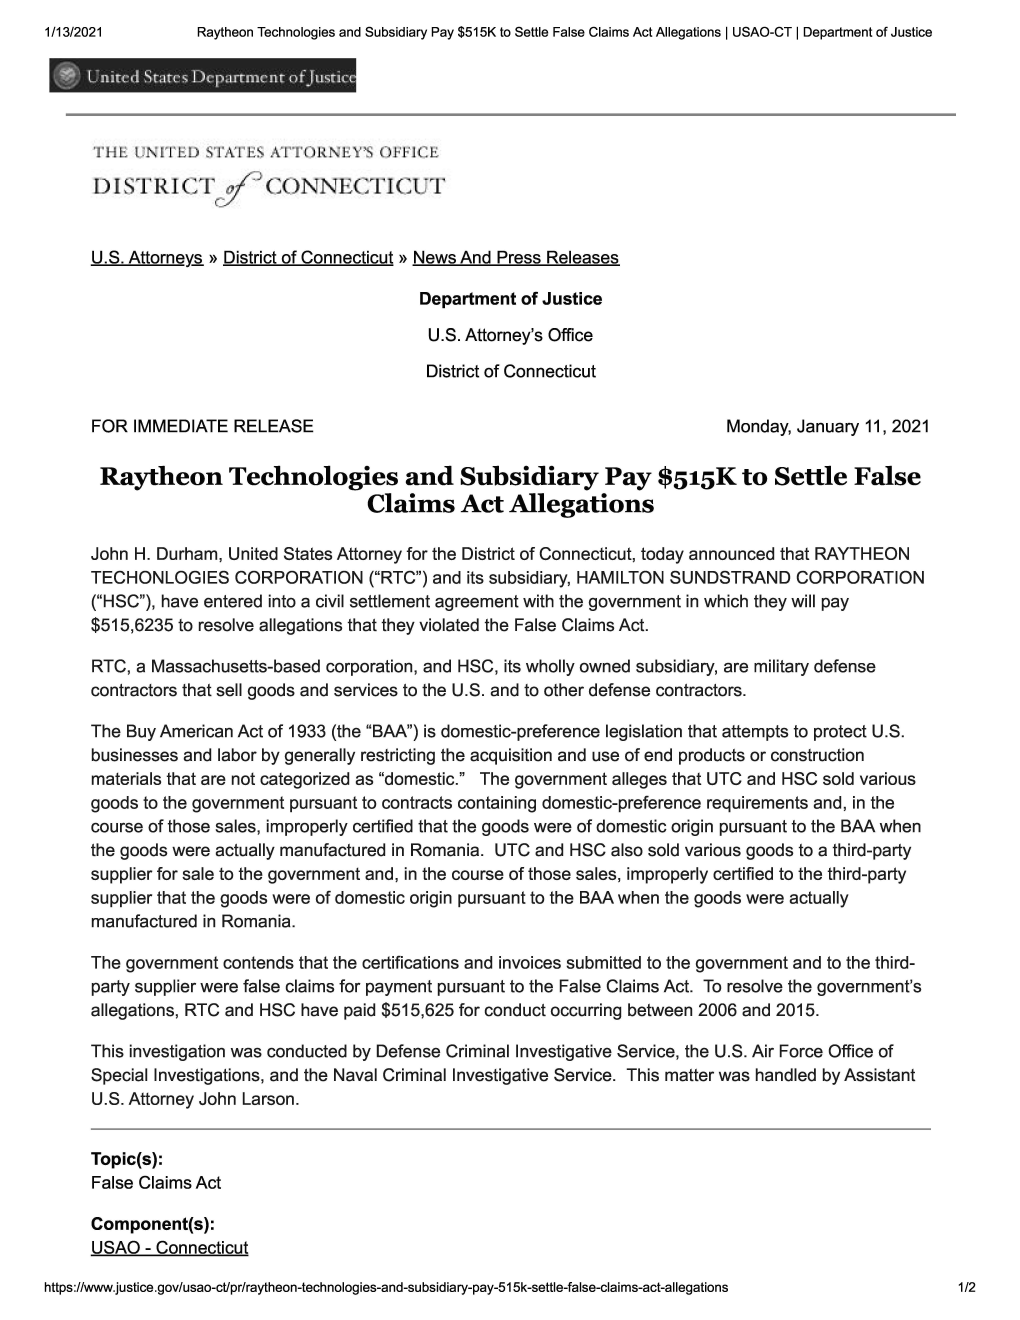 Raytheon Technologies and Subsidiary Pay $515K to Settle False Claims Act Allegations I USAO-CT I Department of Justice